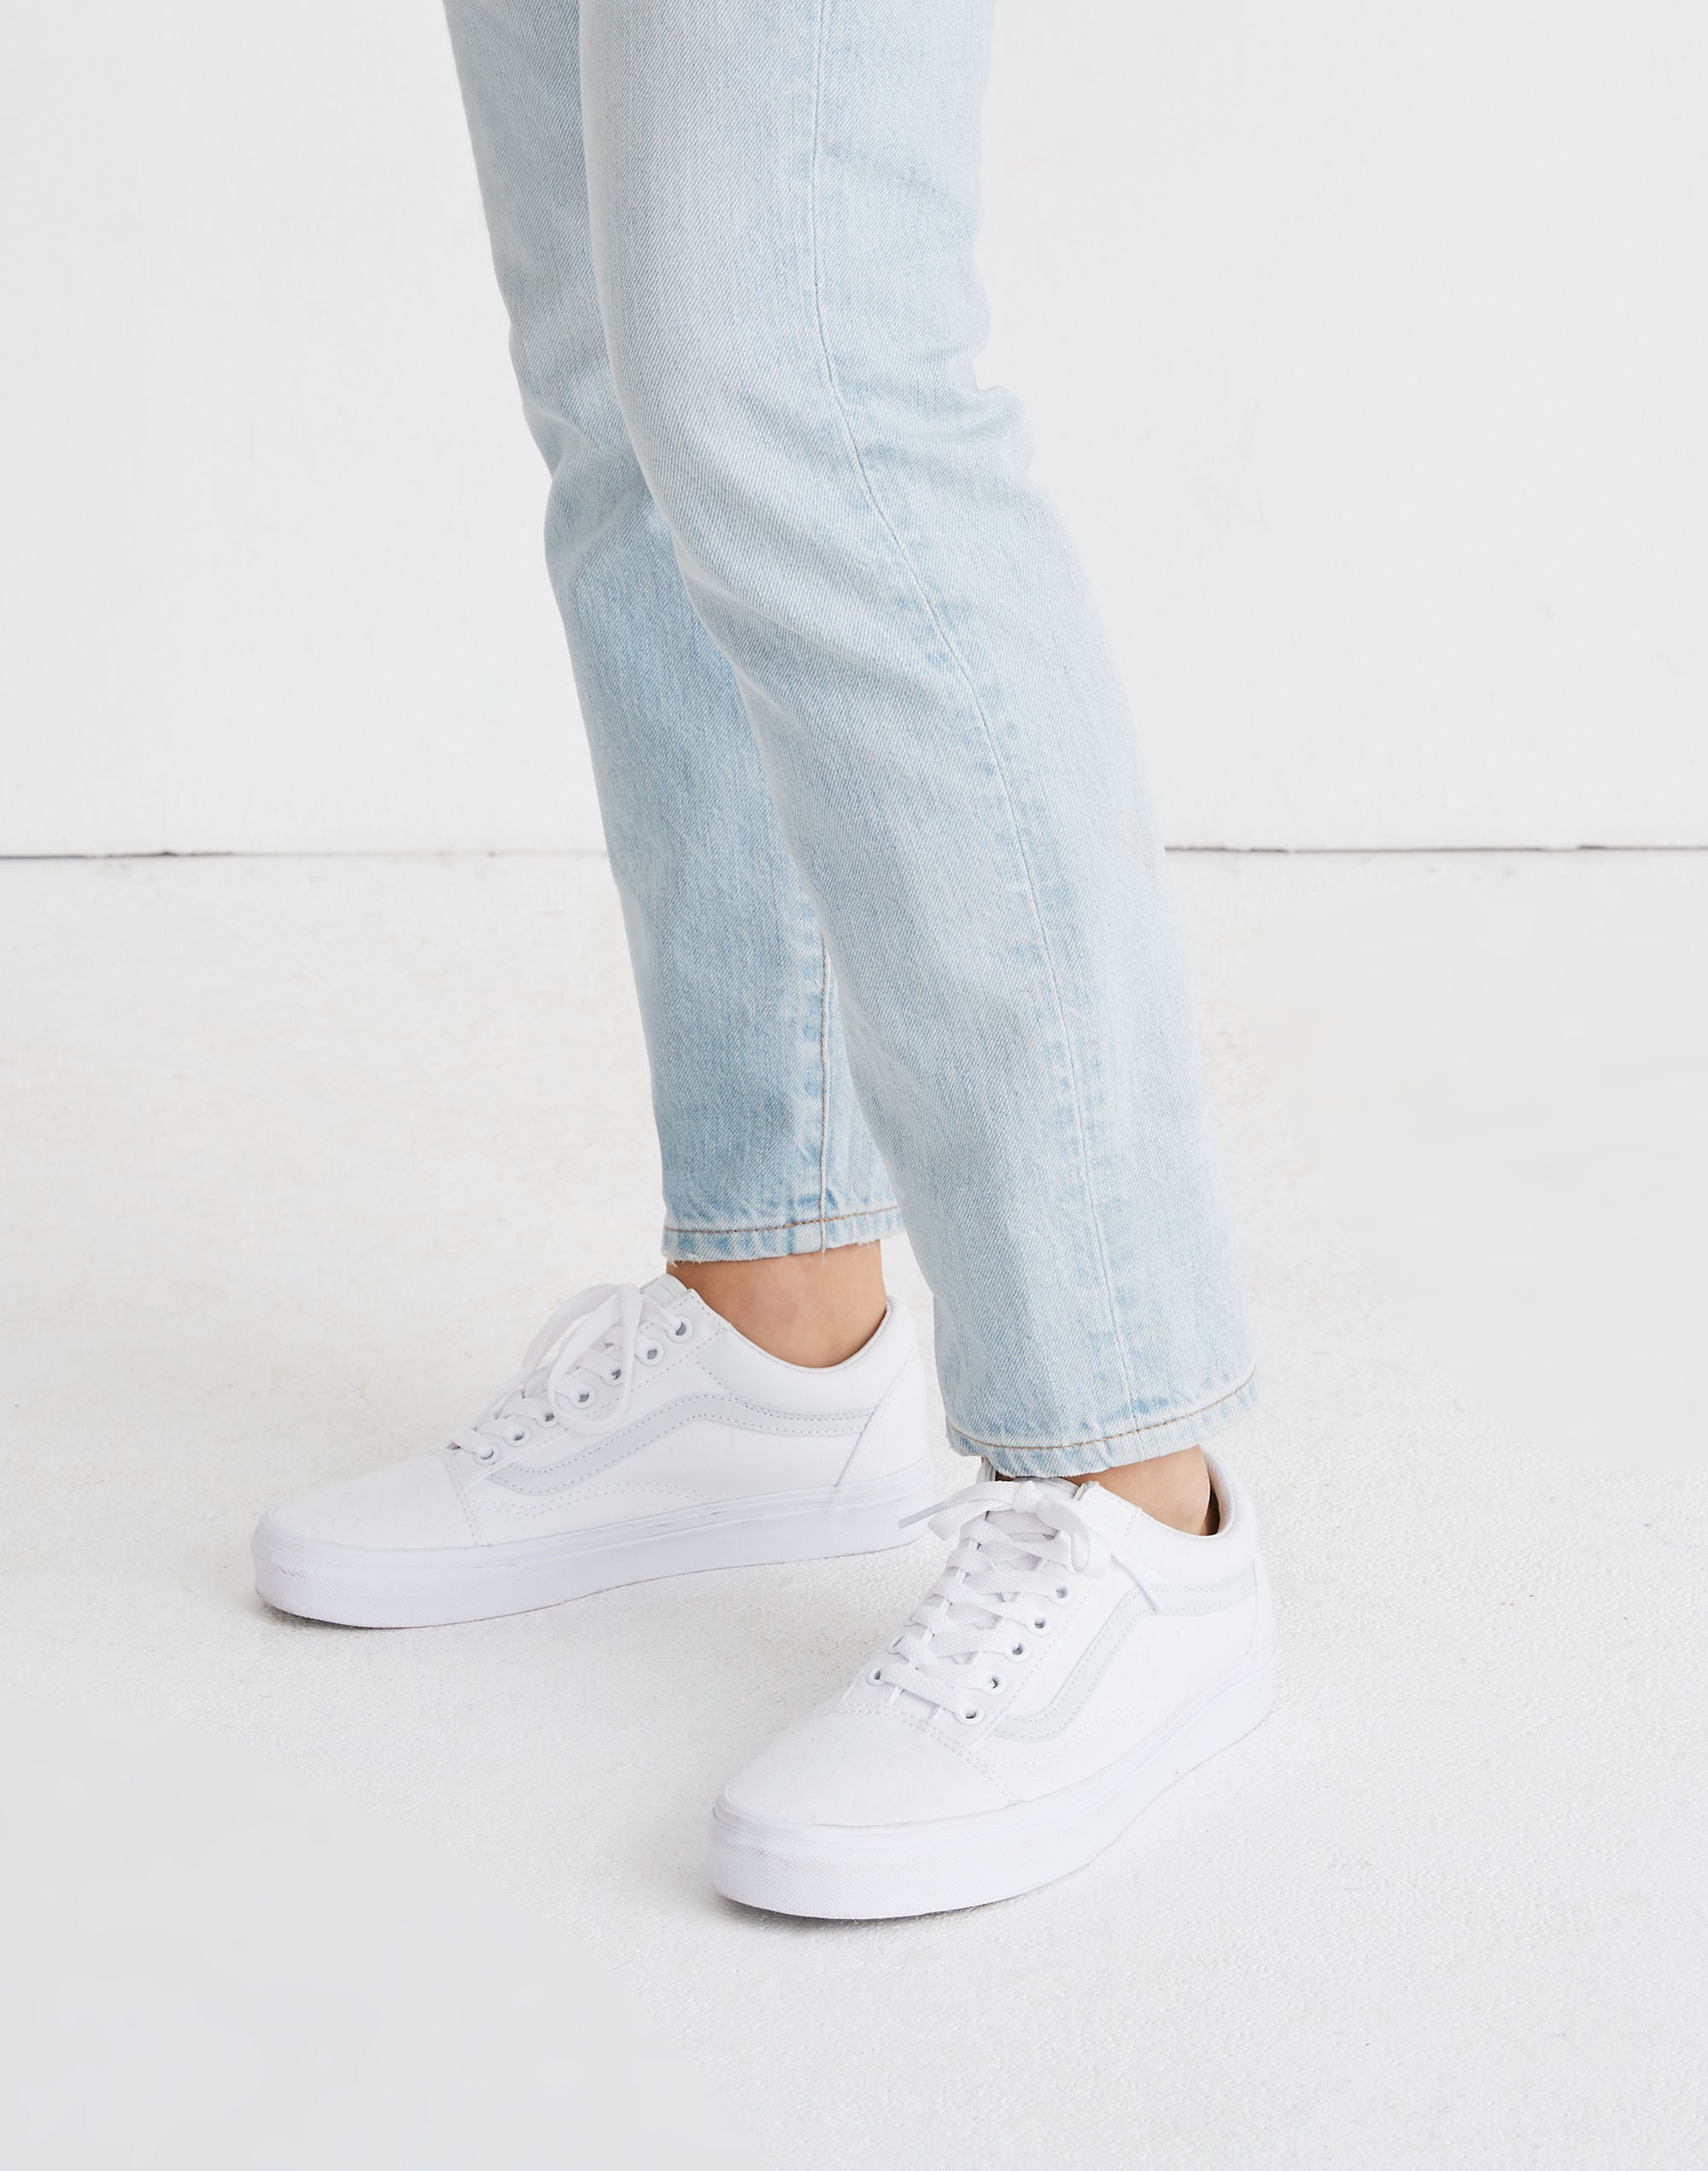 Vans® Unisex Old Skool Lace-Up Sneakers Canvas and Suede